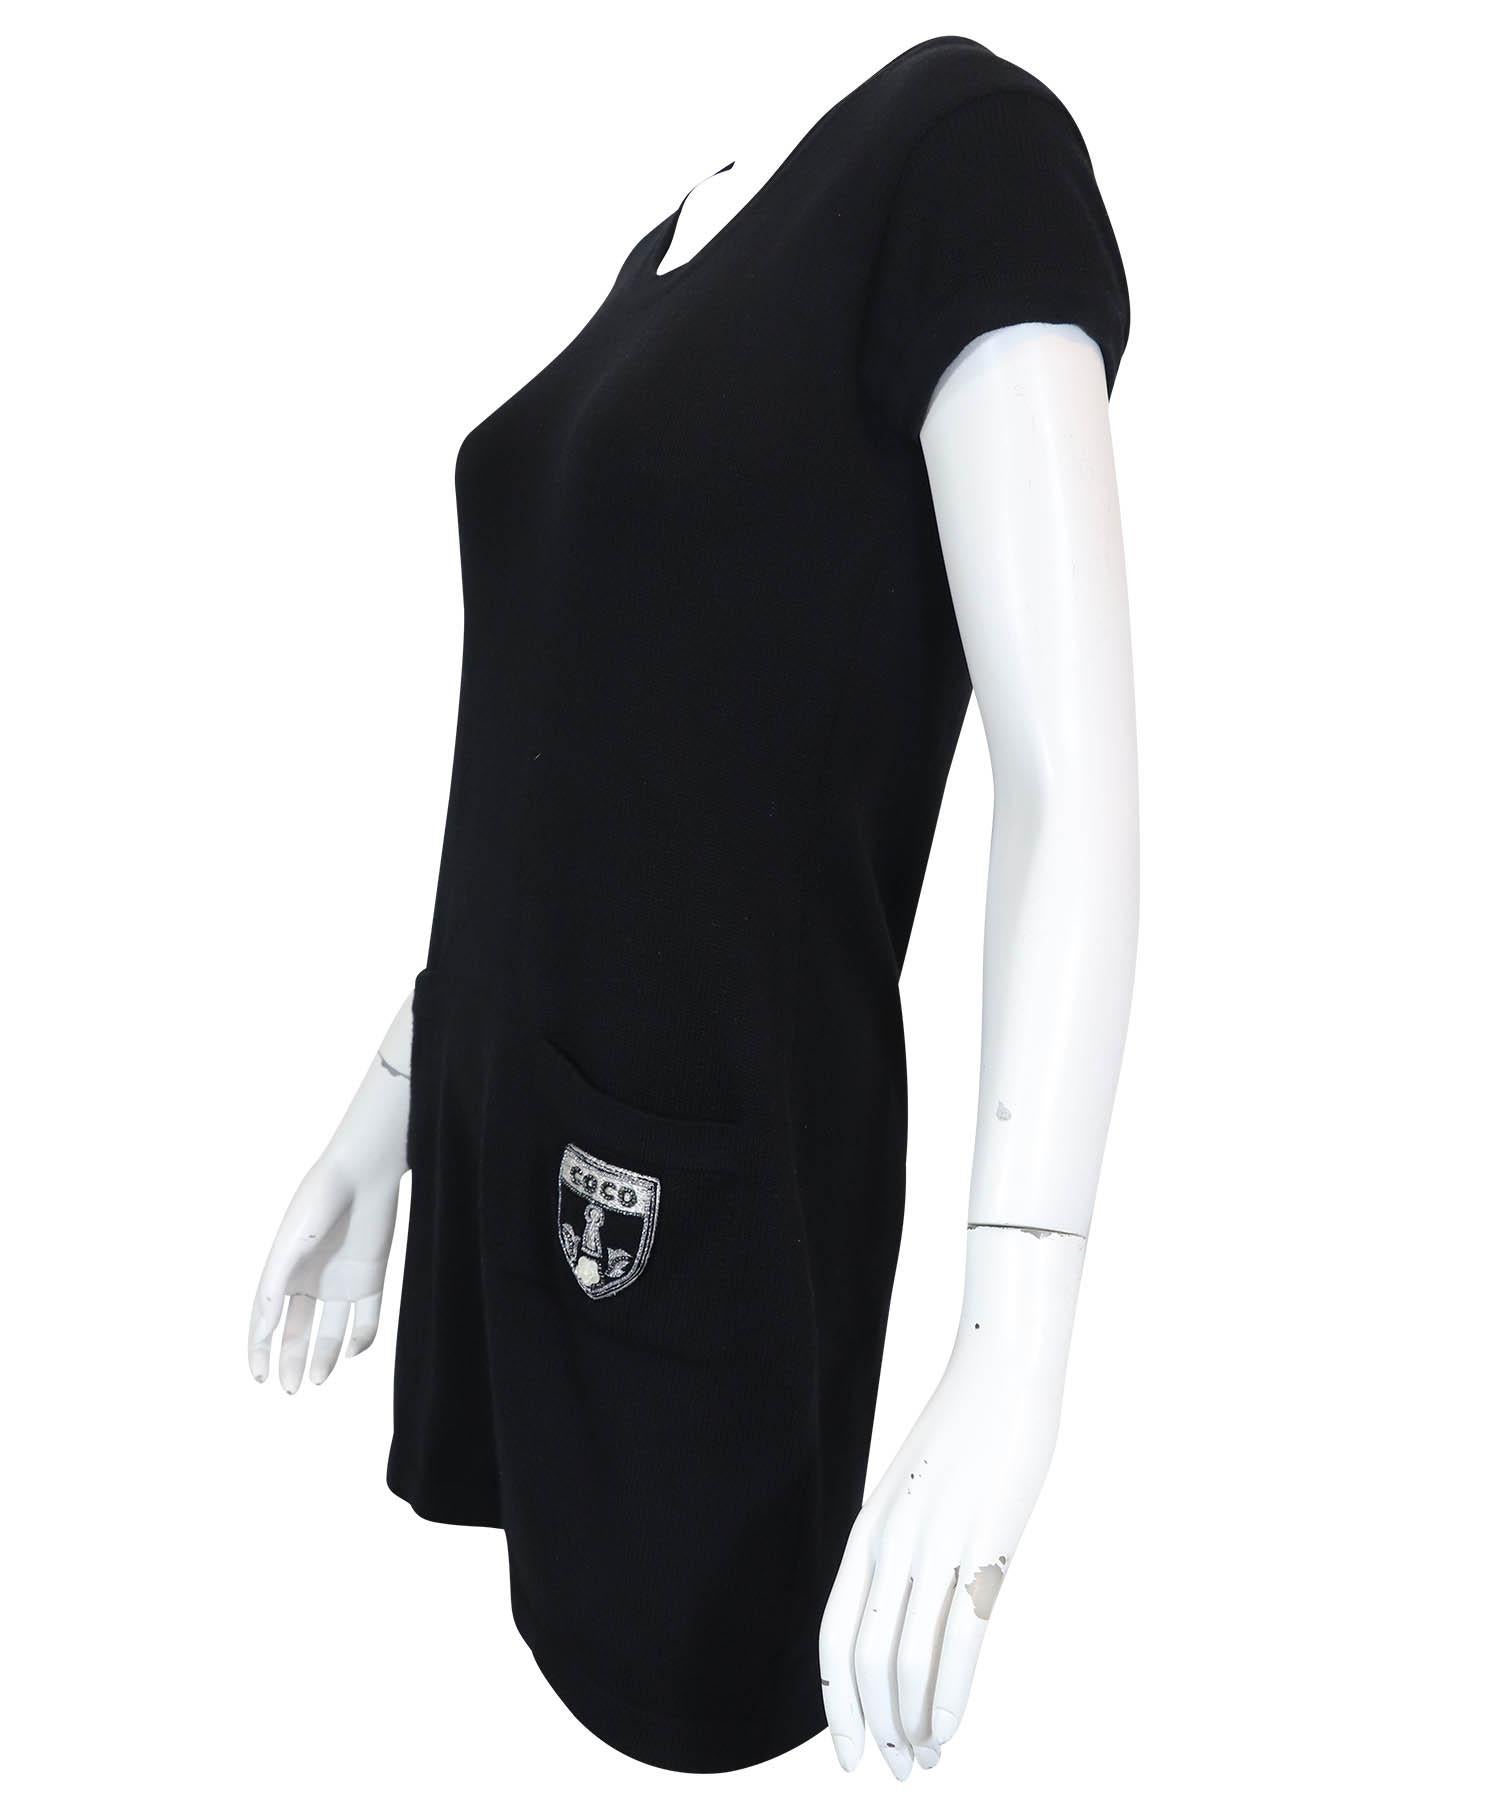 Chanel black cashmere knit mini dress with 2 patch pockets at hips. Famous Devil Wears Prada COCO patch at on hip pocket. Cap sleeves, stretch 100% cashmere knit. Very good condition. From 2007. Size 40.

Measurements unstretched:
Bust: 34